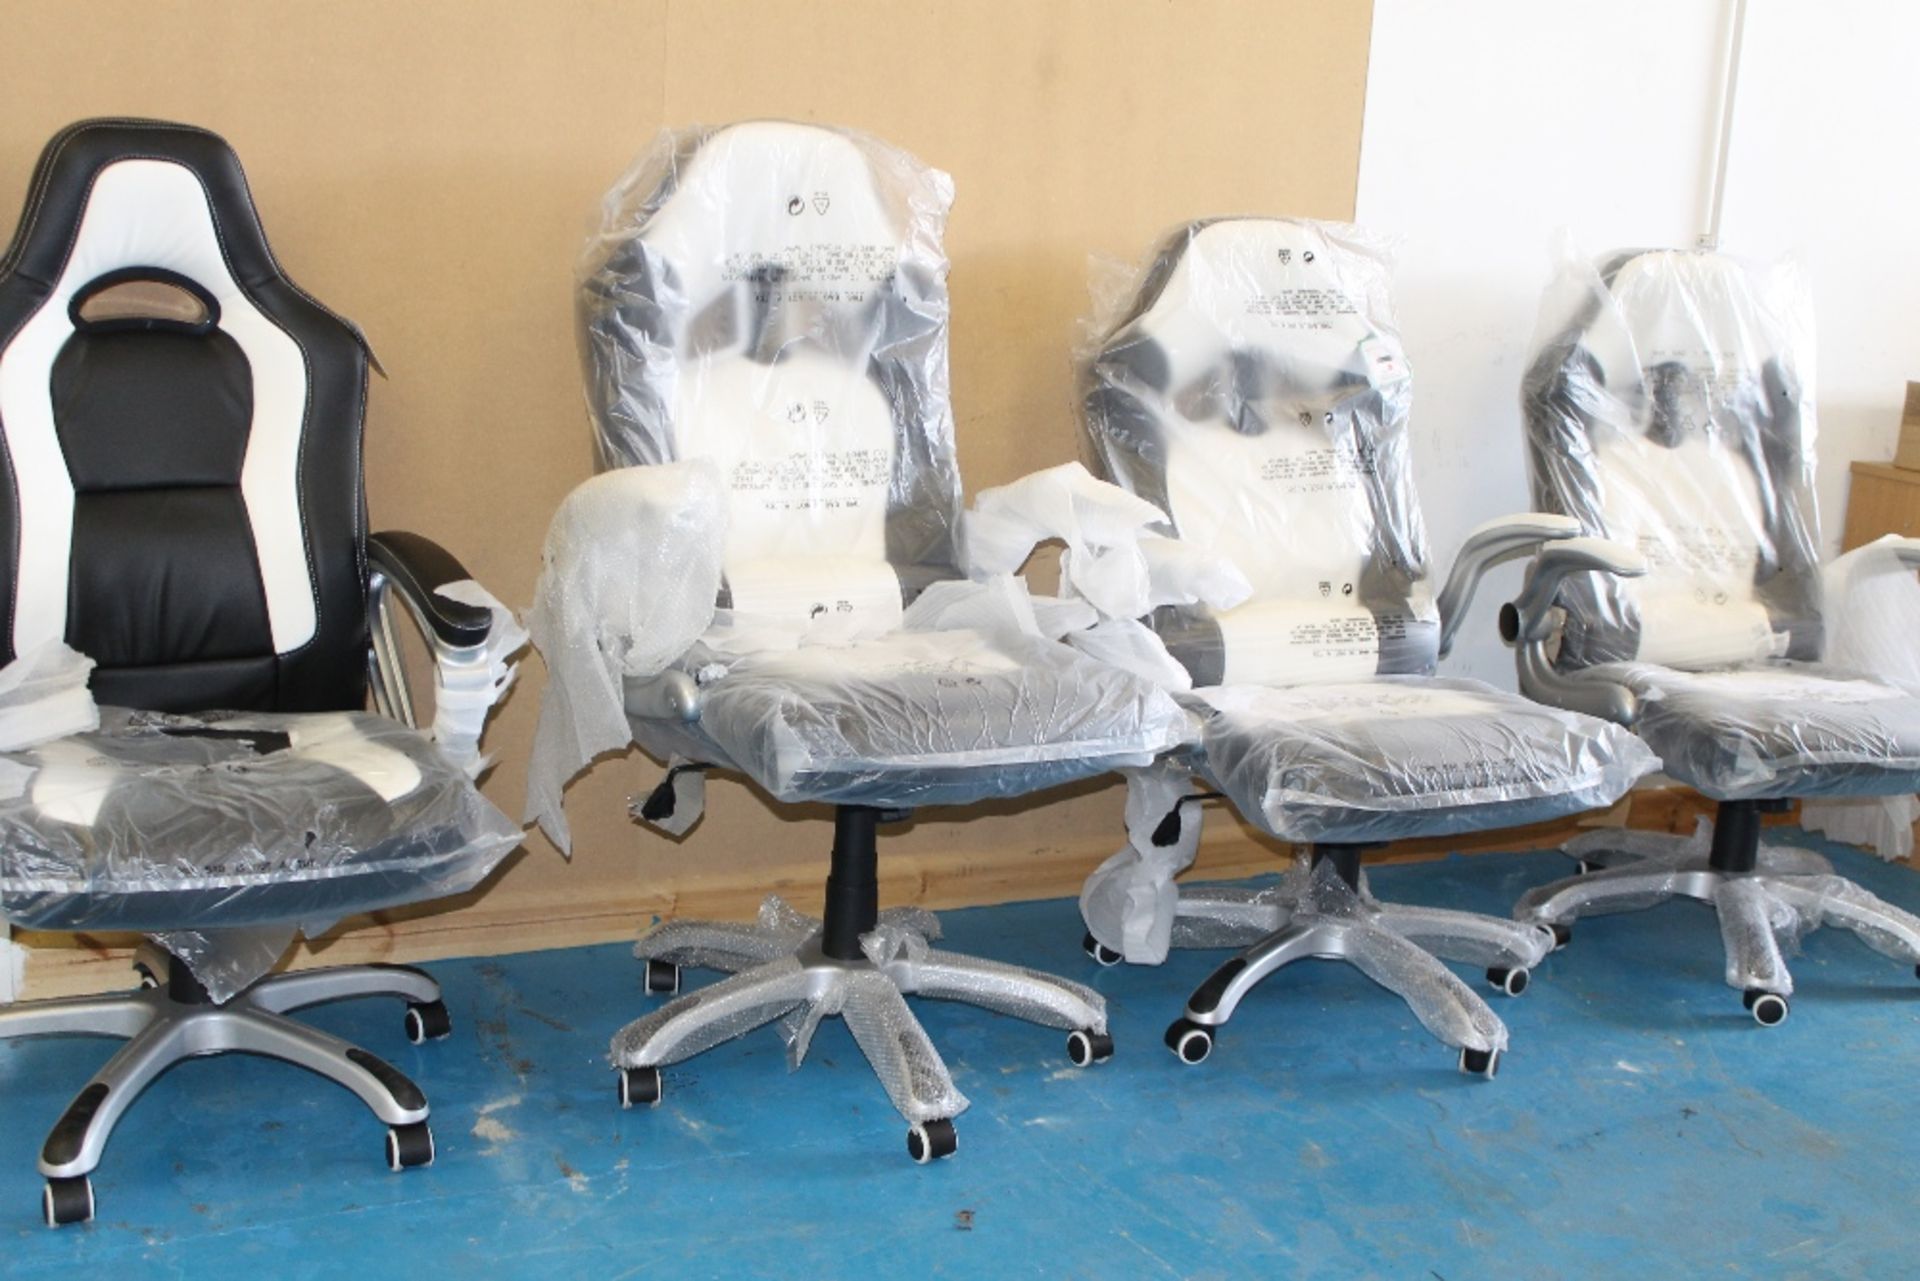 Brand New Executive Office Chair – White & Black Sports Seat Design - NO VAT - Image 2 of 2